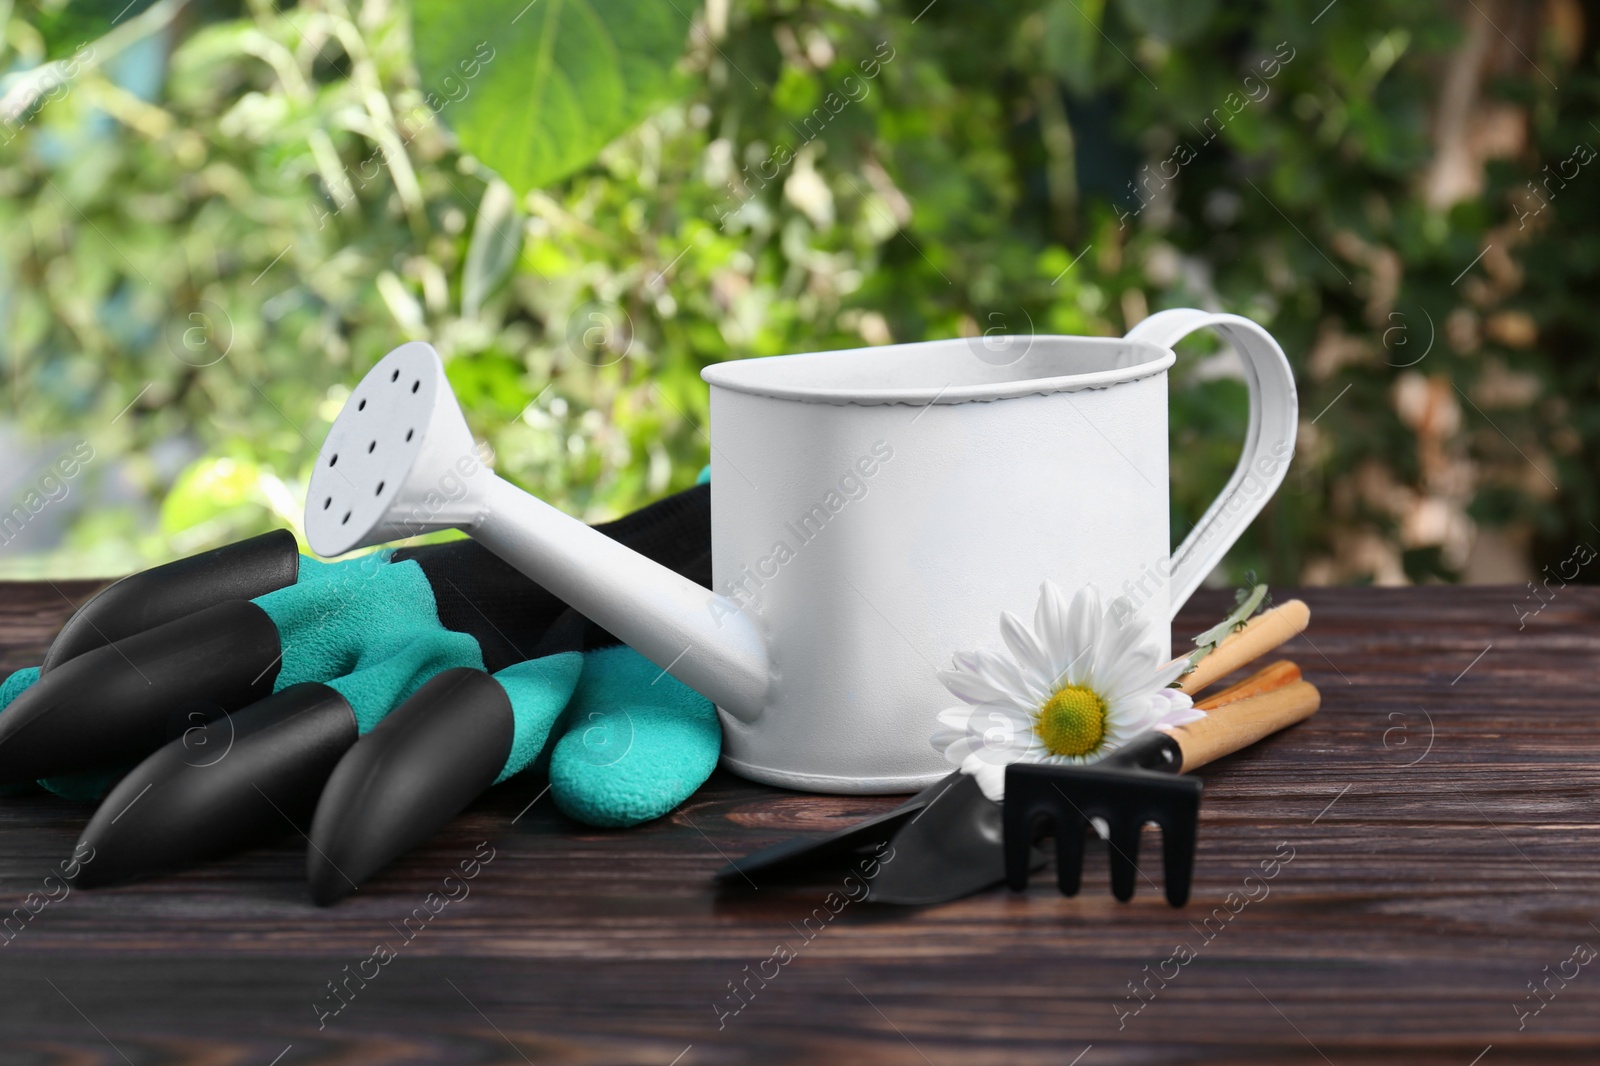 Photo of Watering can, flower and gardening tools on wooden table outdoors